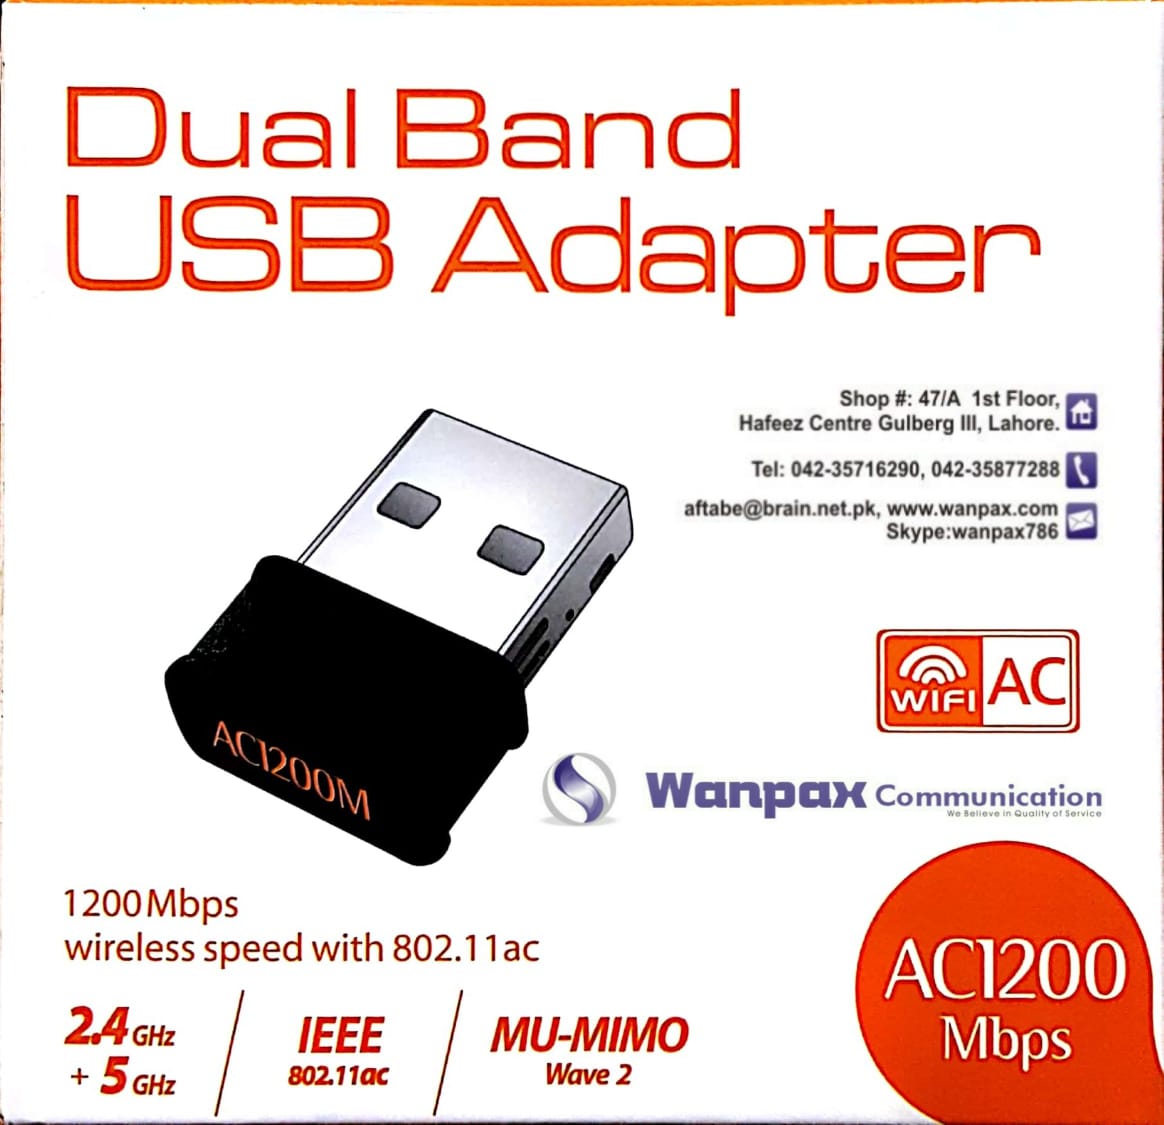 product.php?id=Daul Band USB Adapter AC1200Mbps